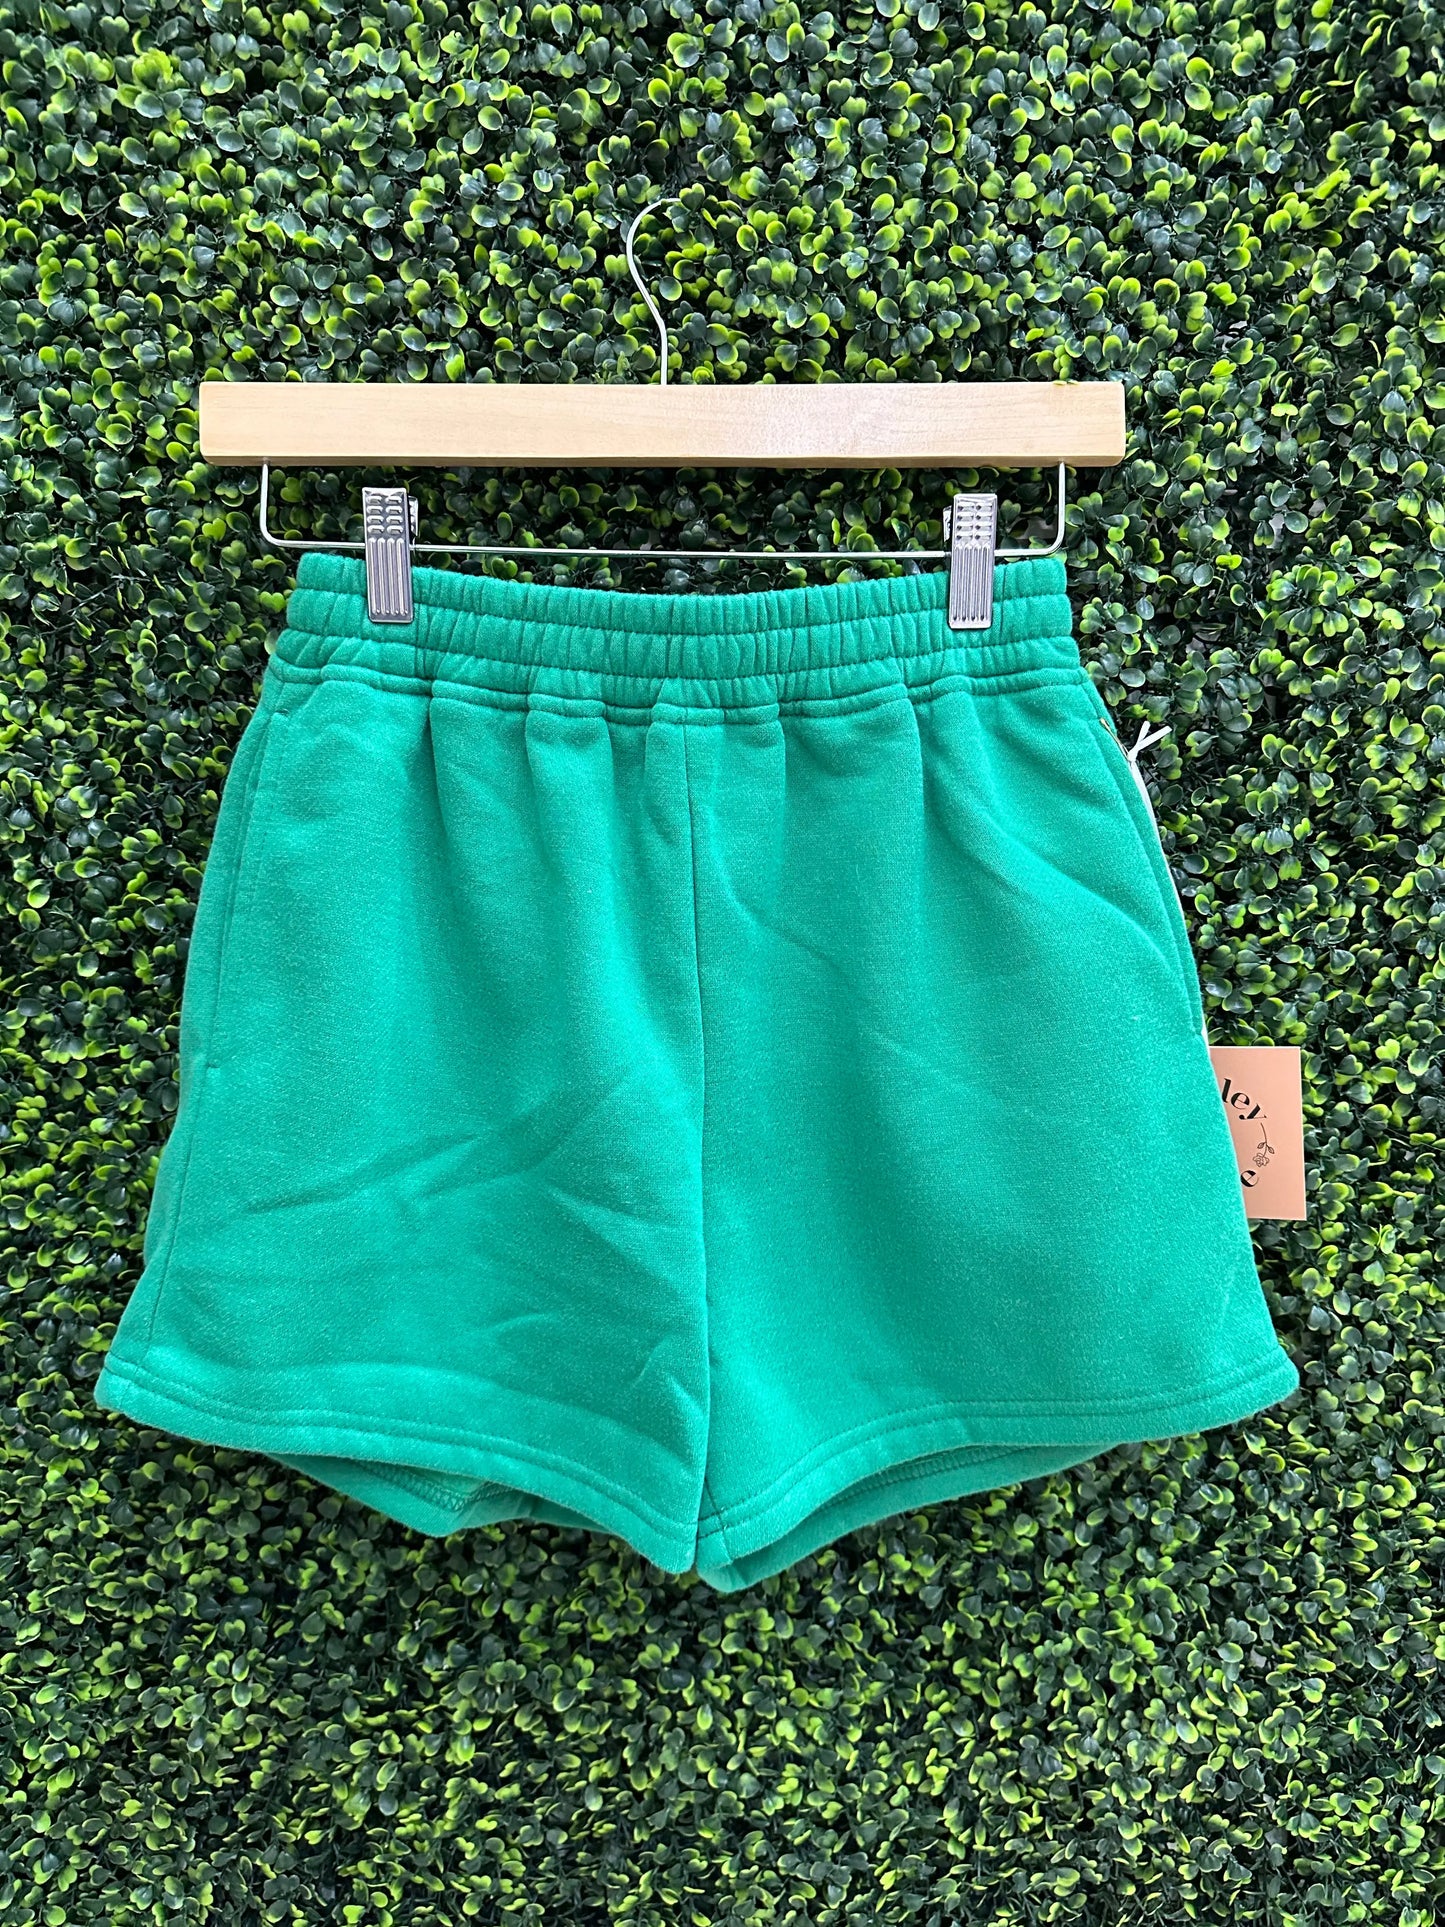 The perfect spring shorts Blondesistersboutique